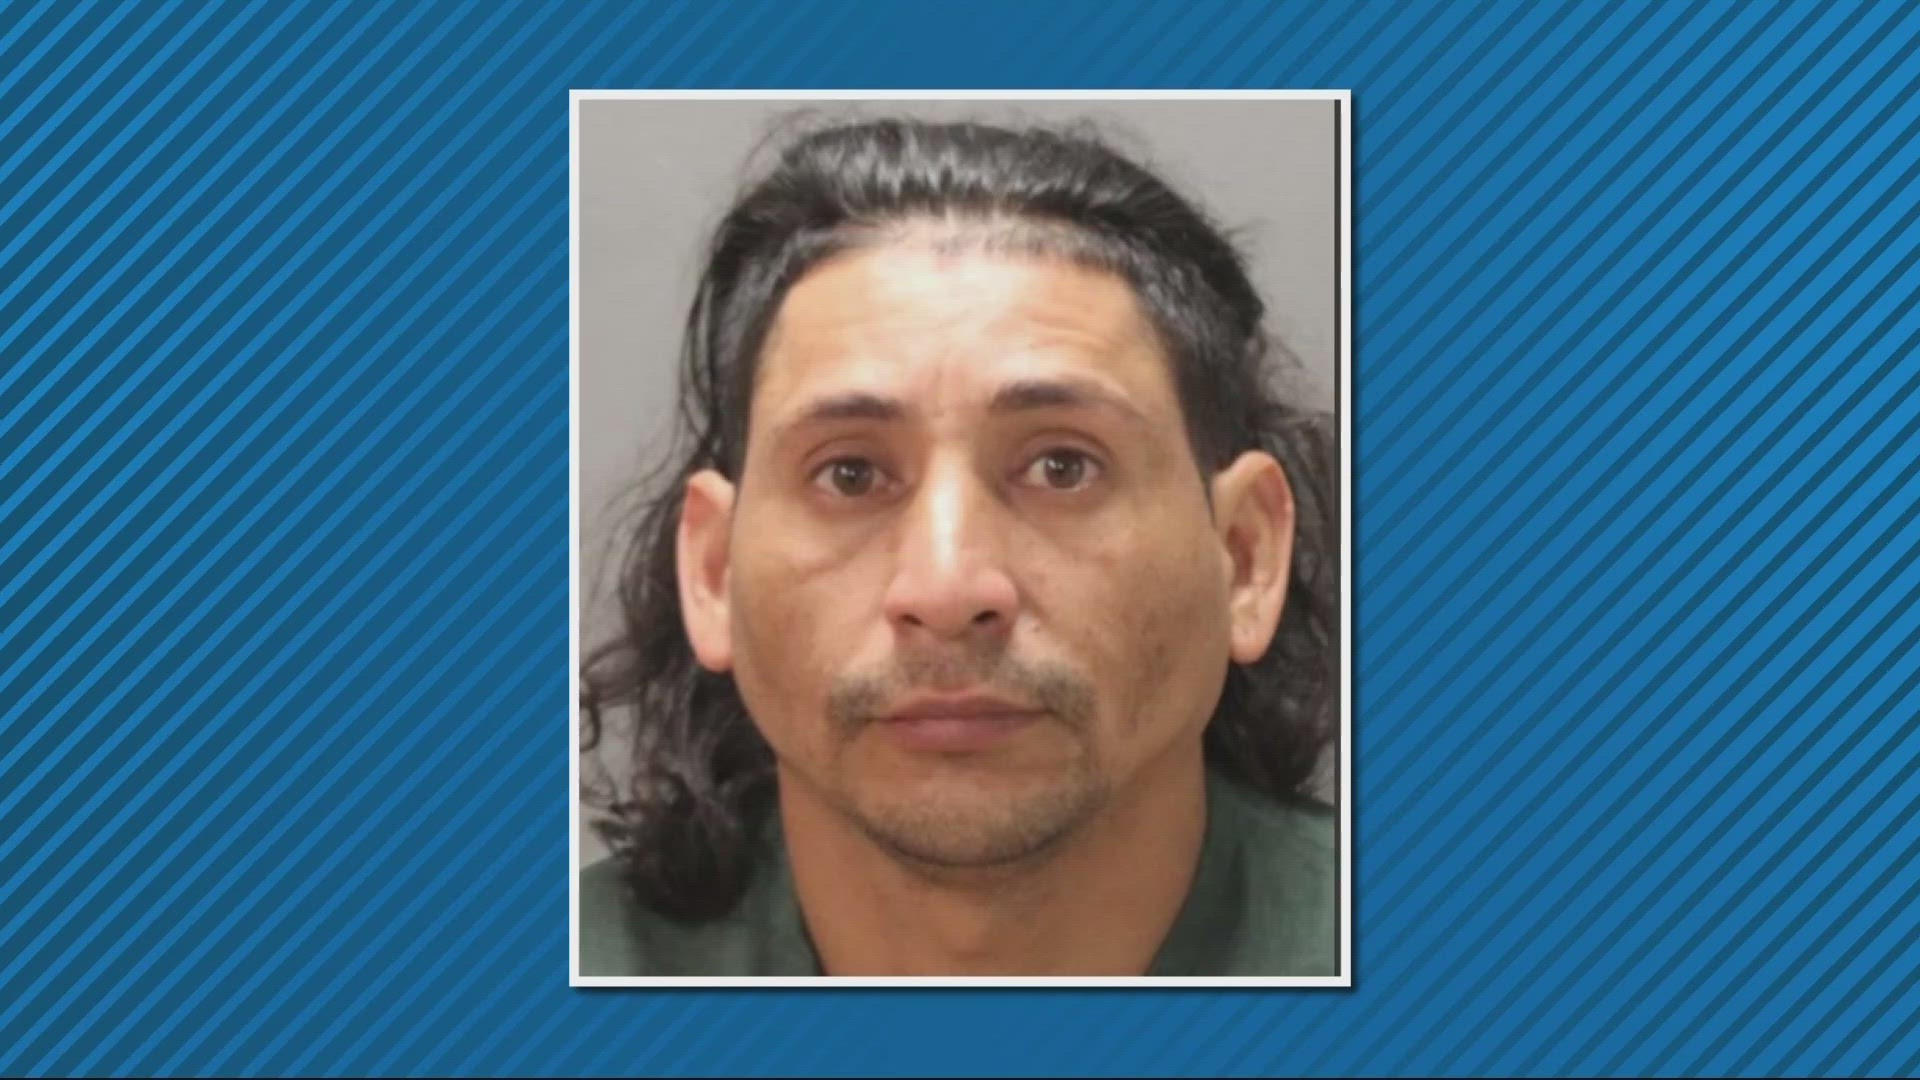 Edwin Rumaldo Amaya faces three charges - vehicular homicide, operating a vehicle without a driver's license and leaving the scene of a crash involving death.